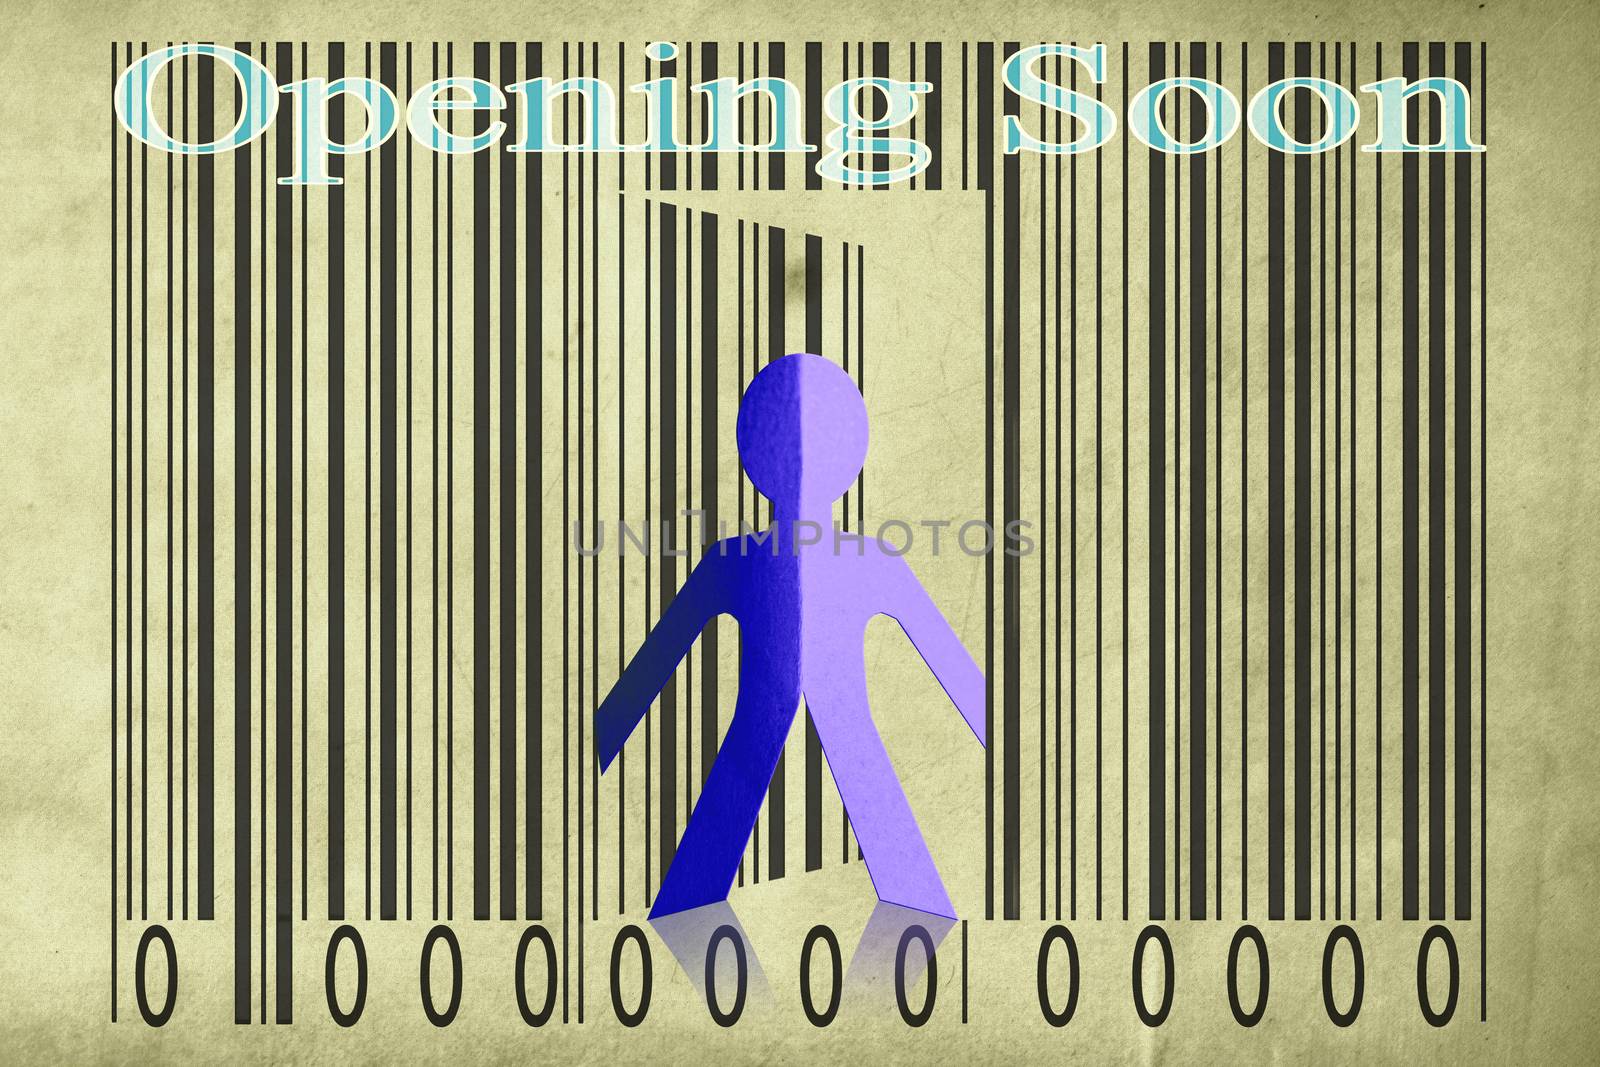 Paperman coming out of a bar code with Opening soon Words